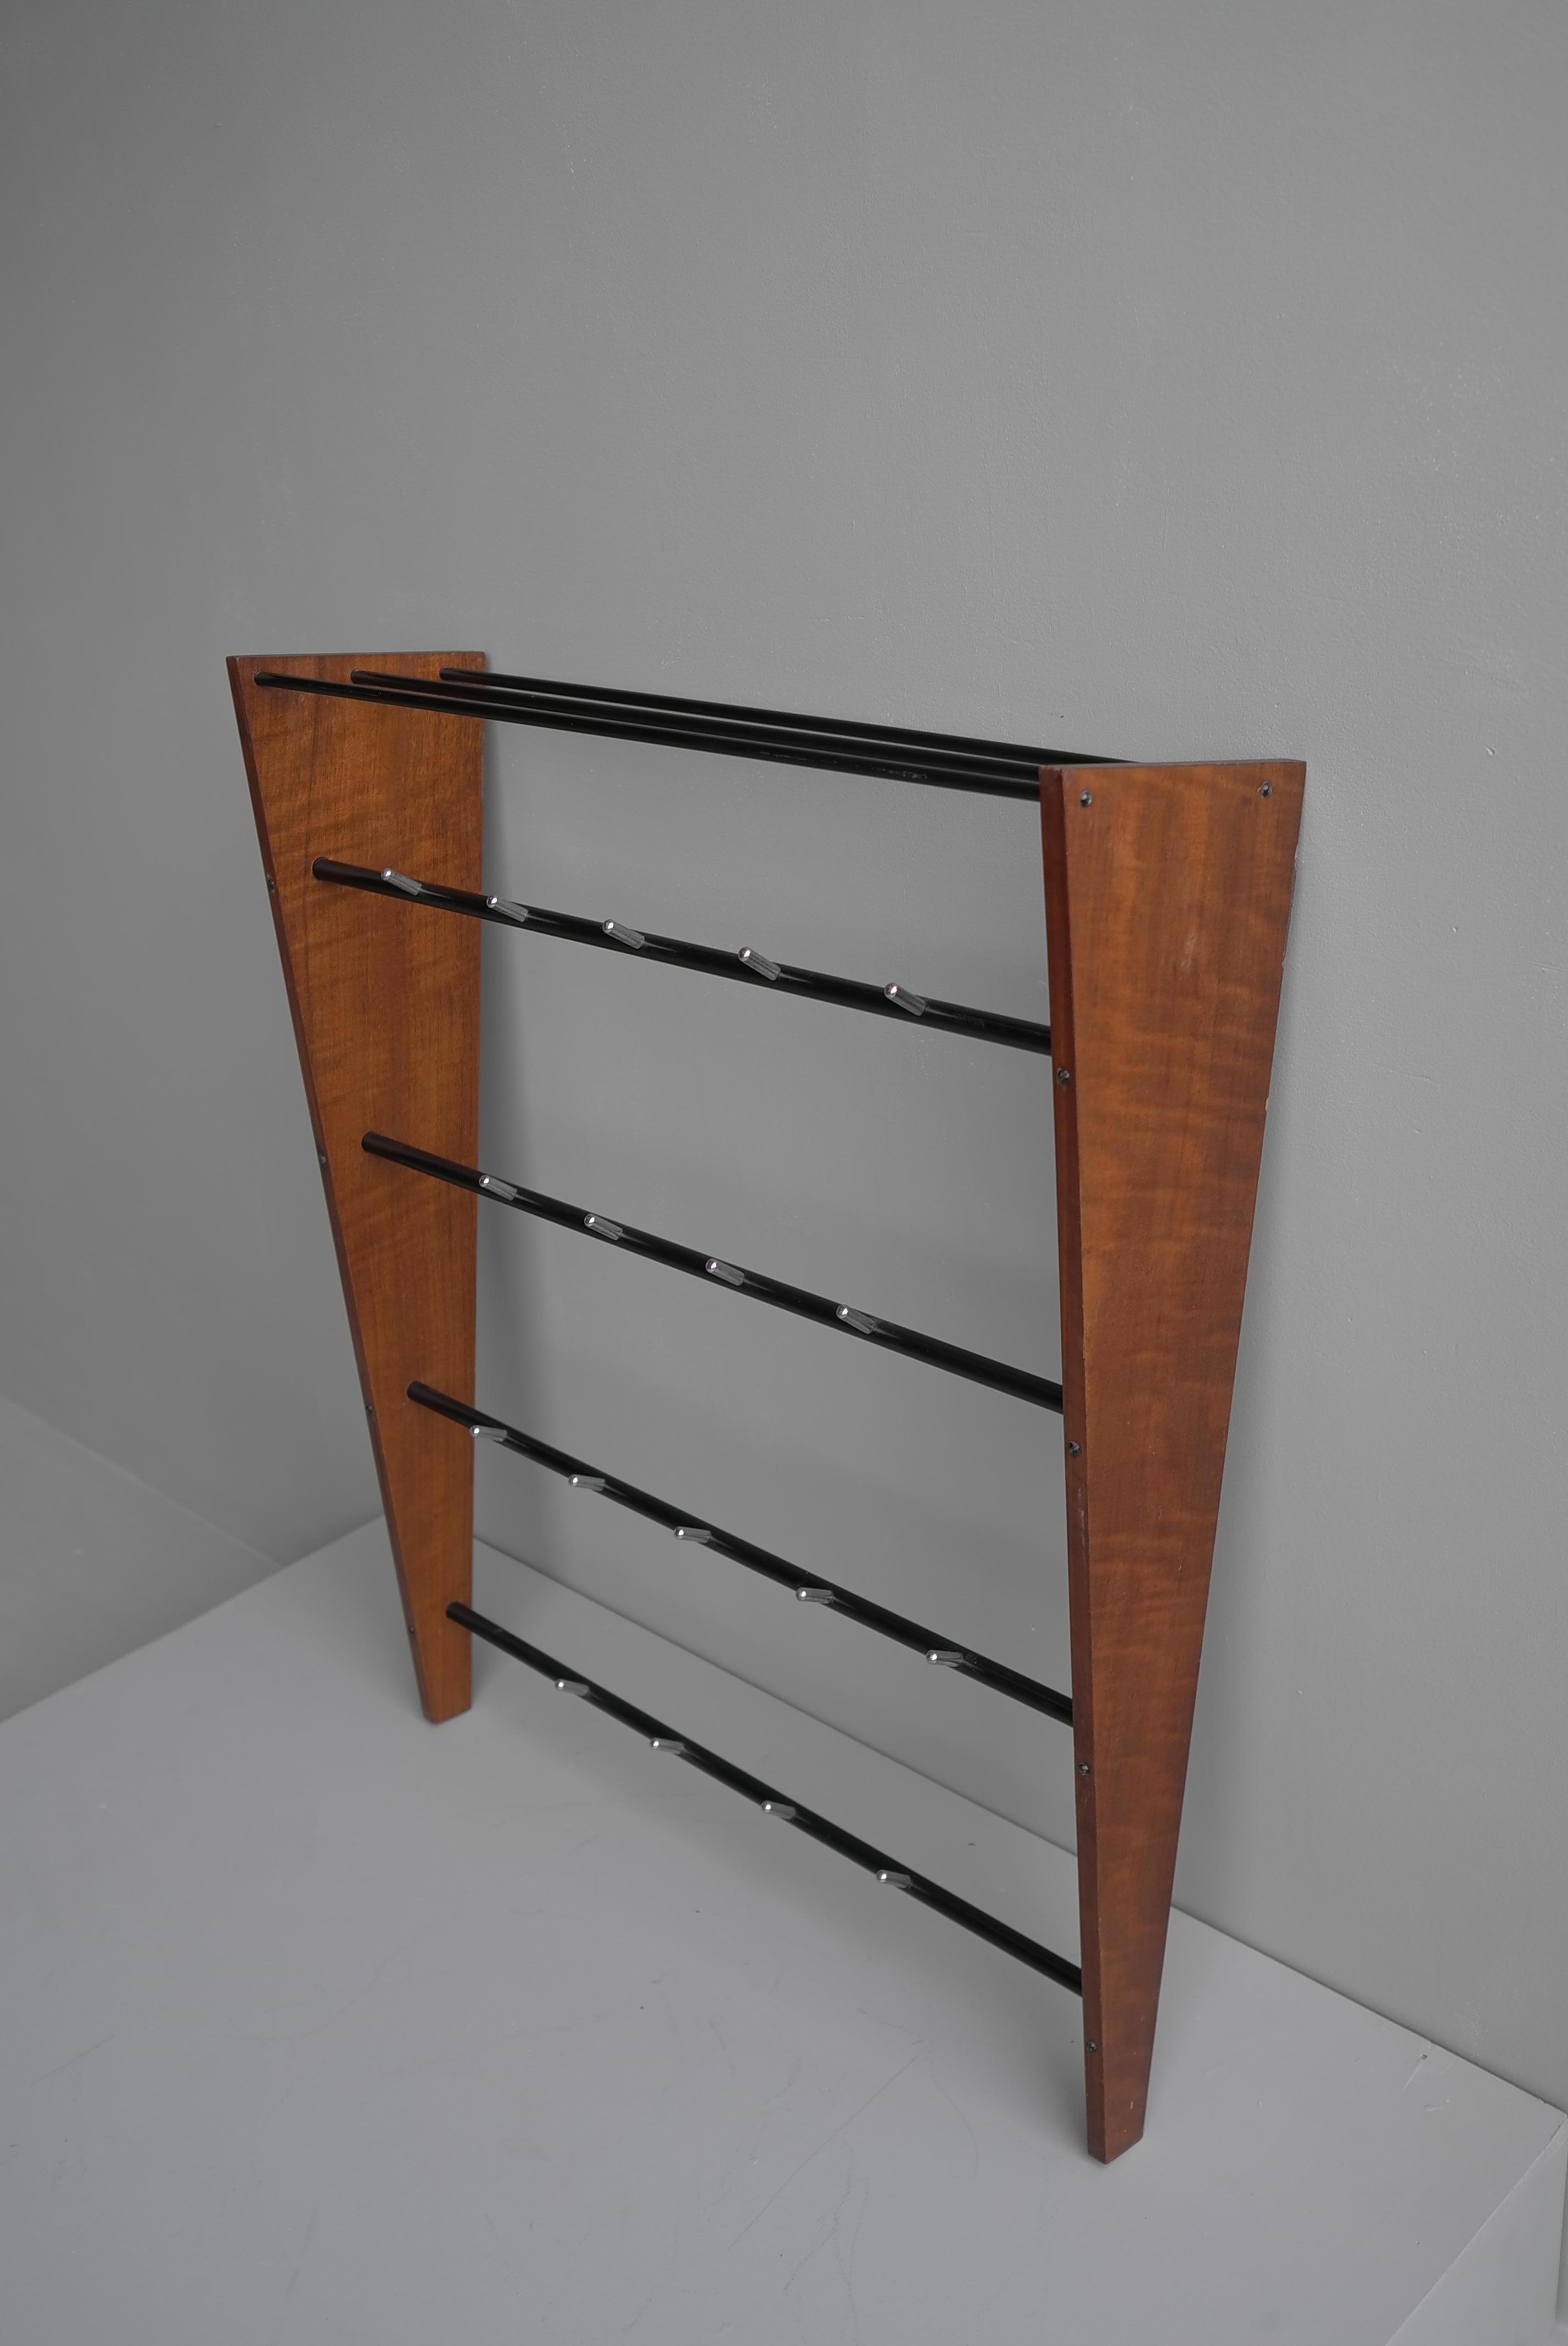 Mid-Century Modern teak and metal wall coat rack, France, 1960s.
Should hang on the wall, mounting material is included.